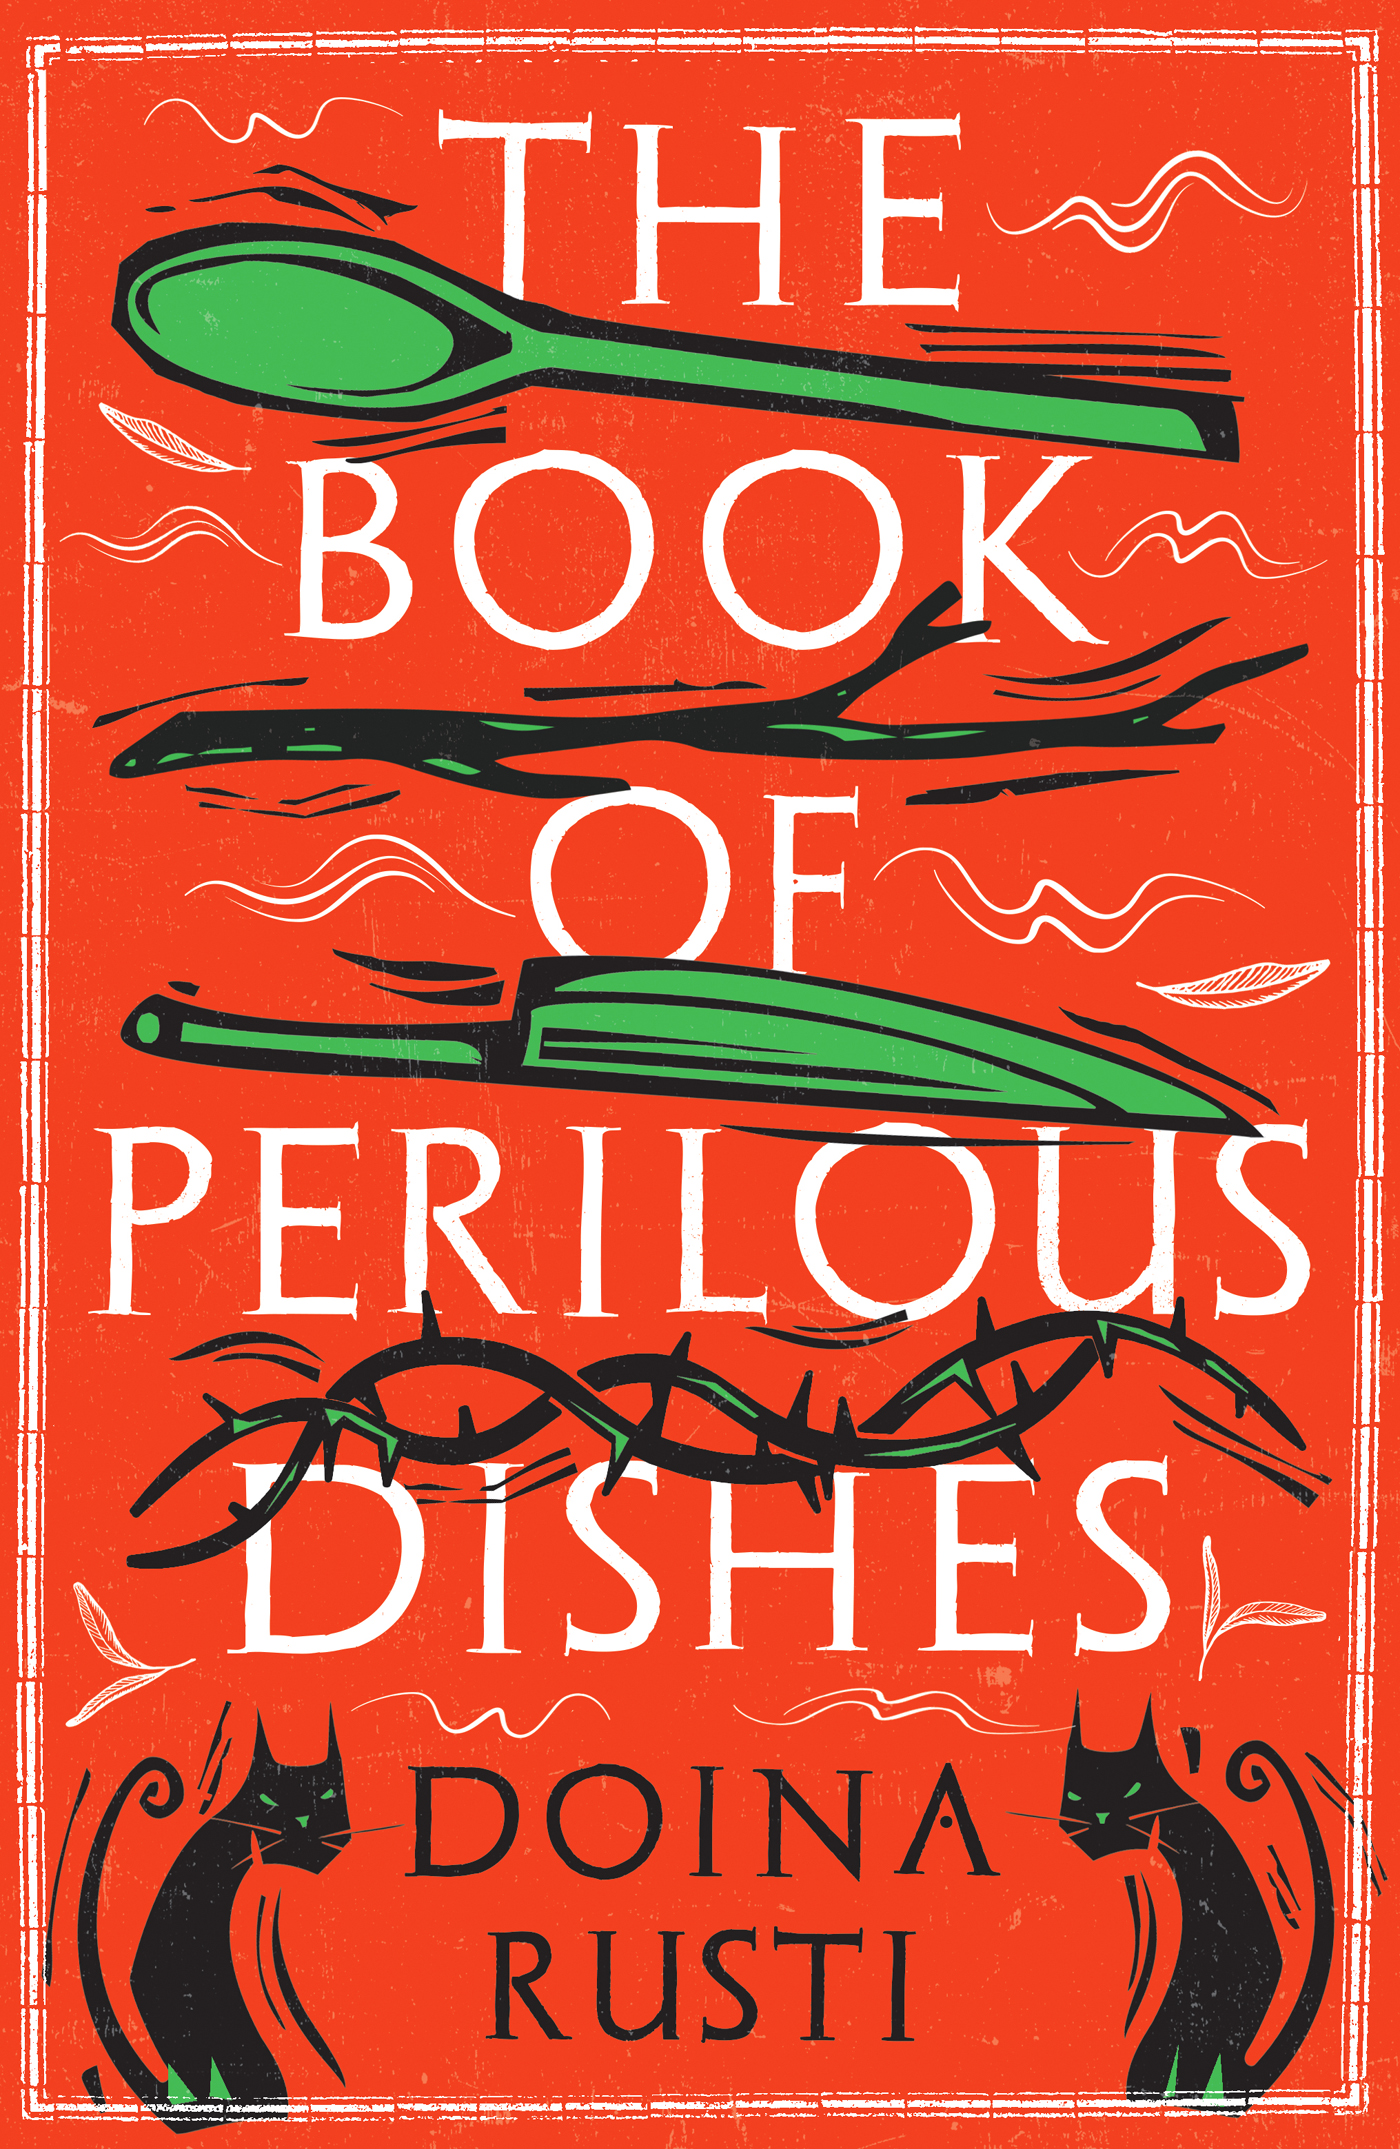 The Book of Perilous Dishes